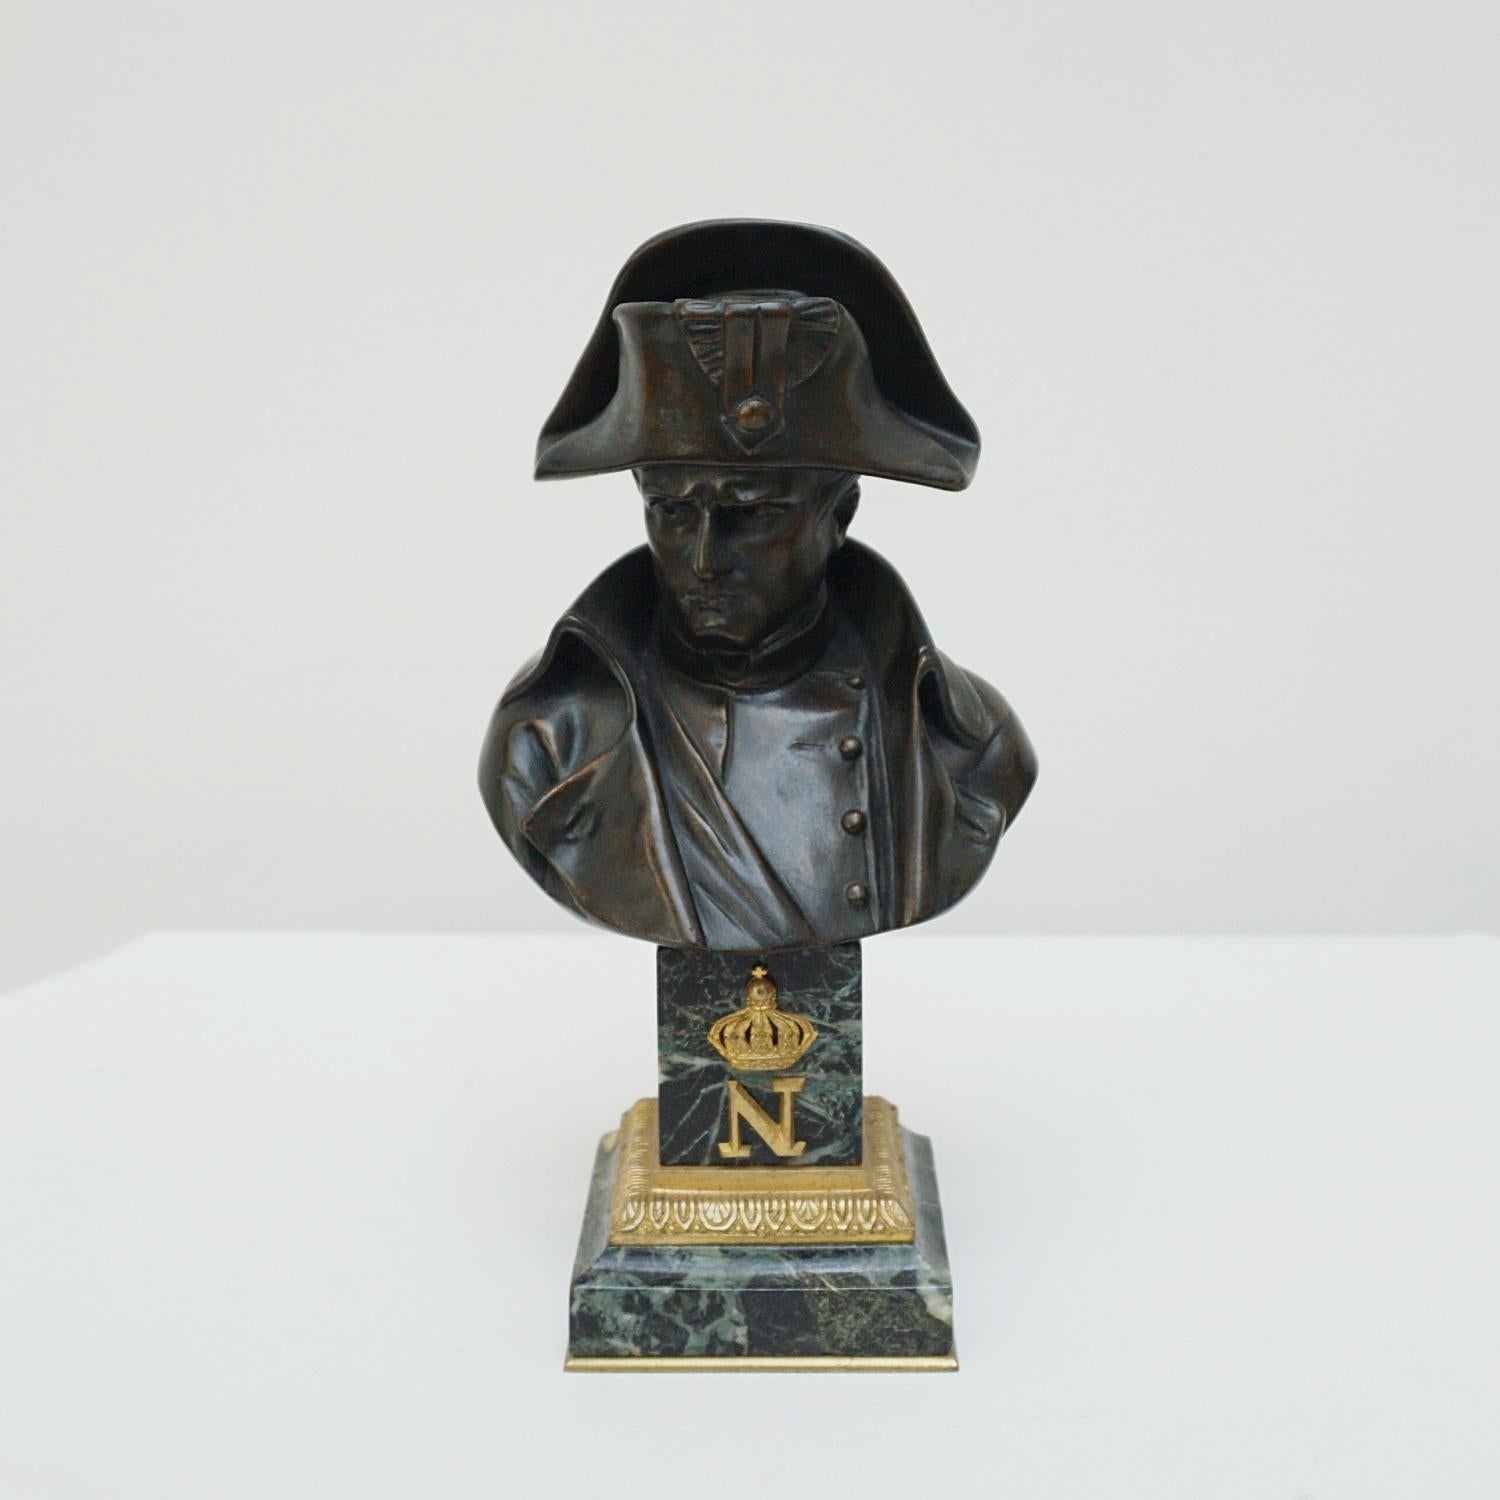 19th century bronze bust of Napoleon Bonaparte by Emile Pinédo (1840 -1916). Set over a stepped marble base. Signed 'Pinédo' with Pairs foundry stamp to underside. 

Dimensions: H 22cm W 13cm D 7.5cm

Origin: French

Date: circa 1880

Item